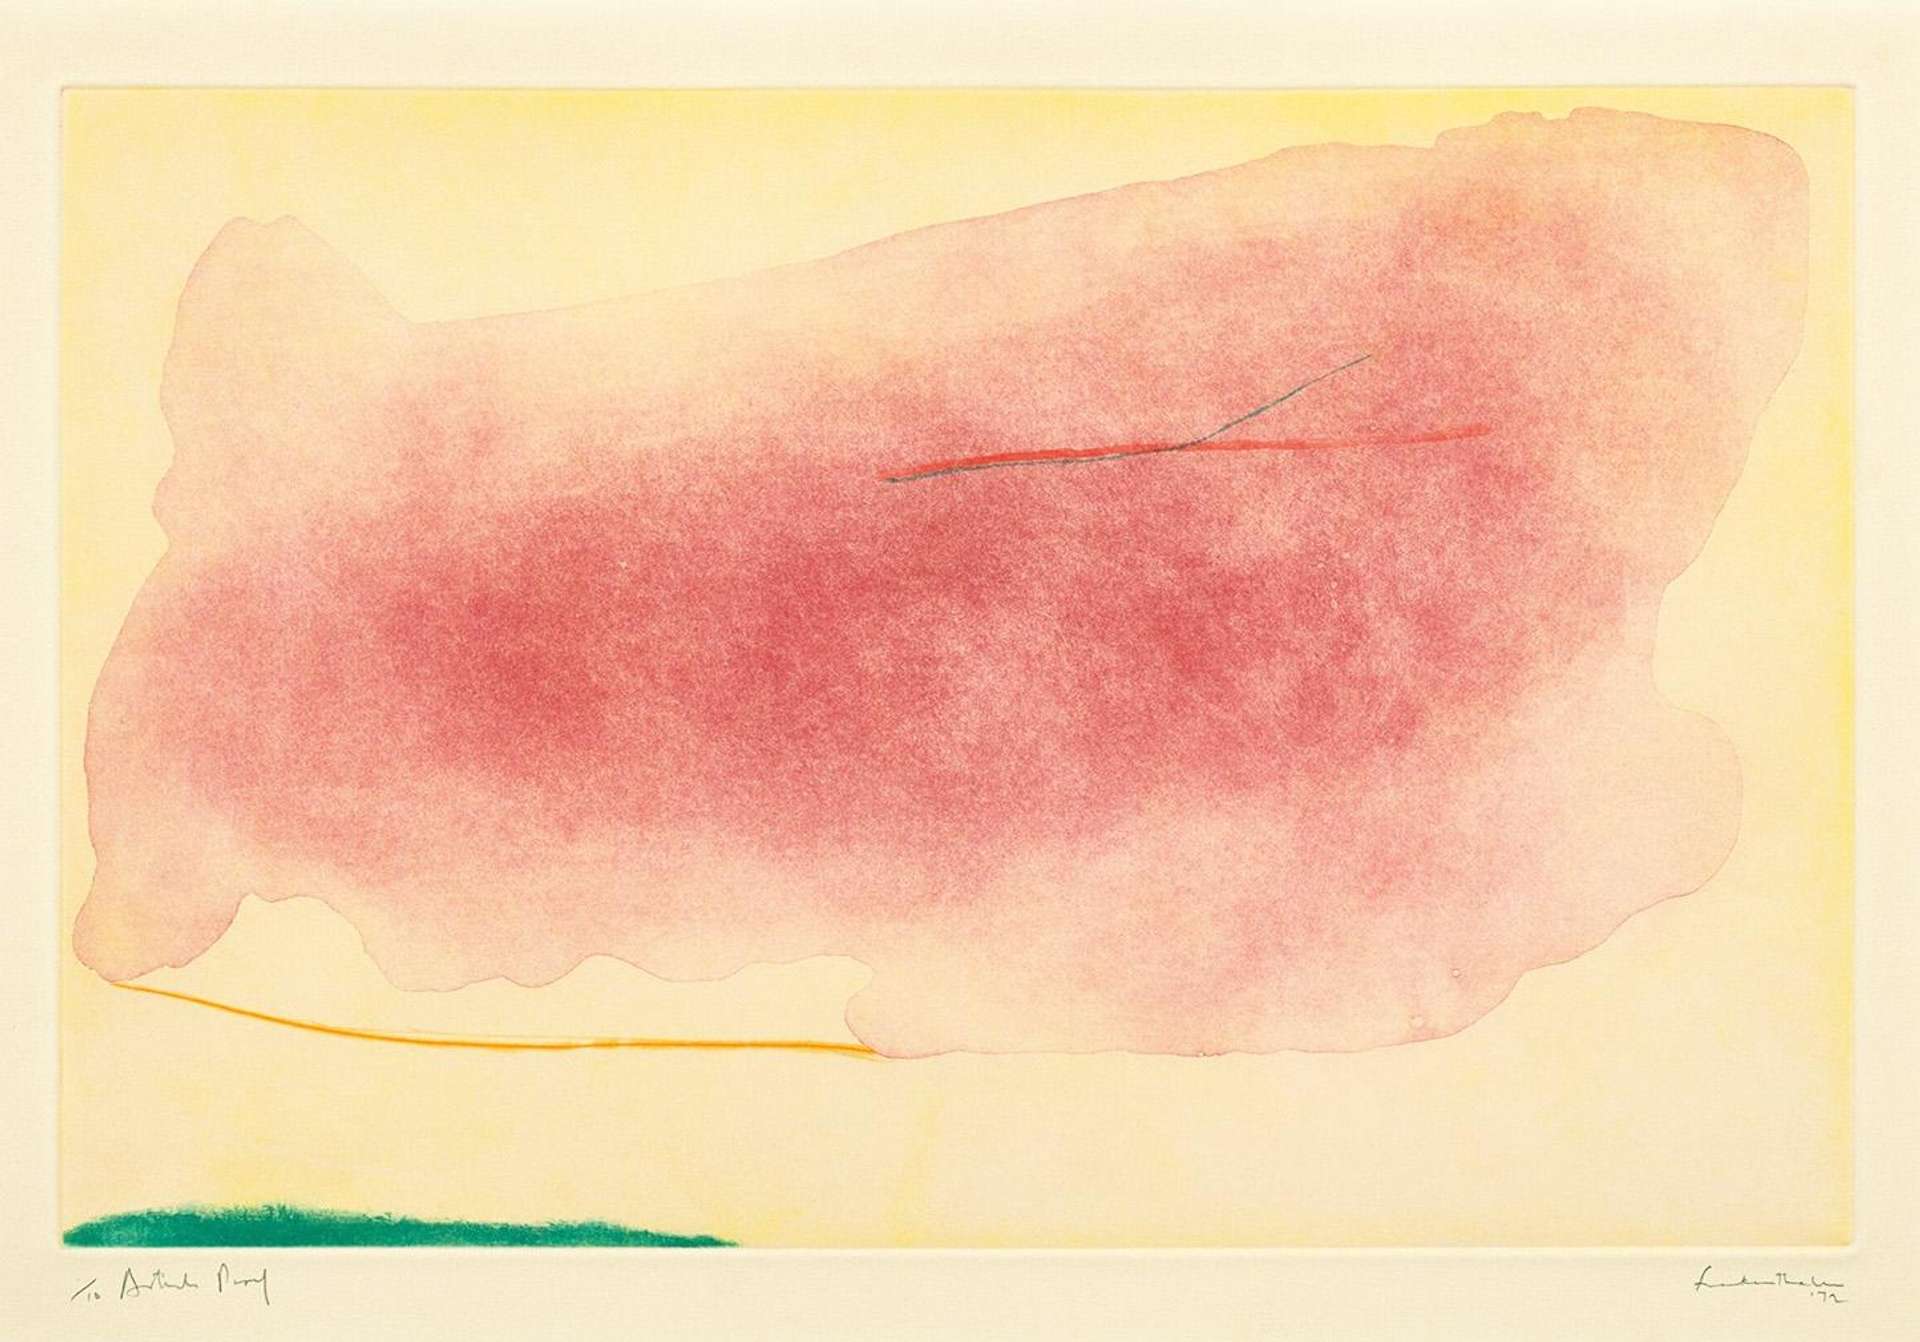 Helen Frankenthaler’s Nepenthe. An abstract expressionist intaglio print of a landscape with a pink sky